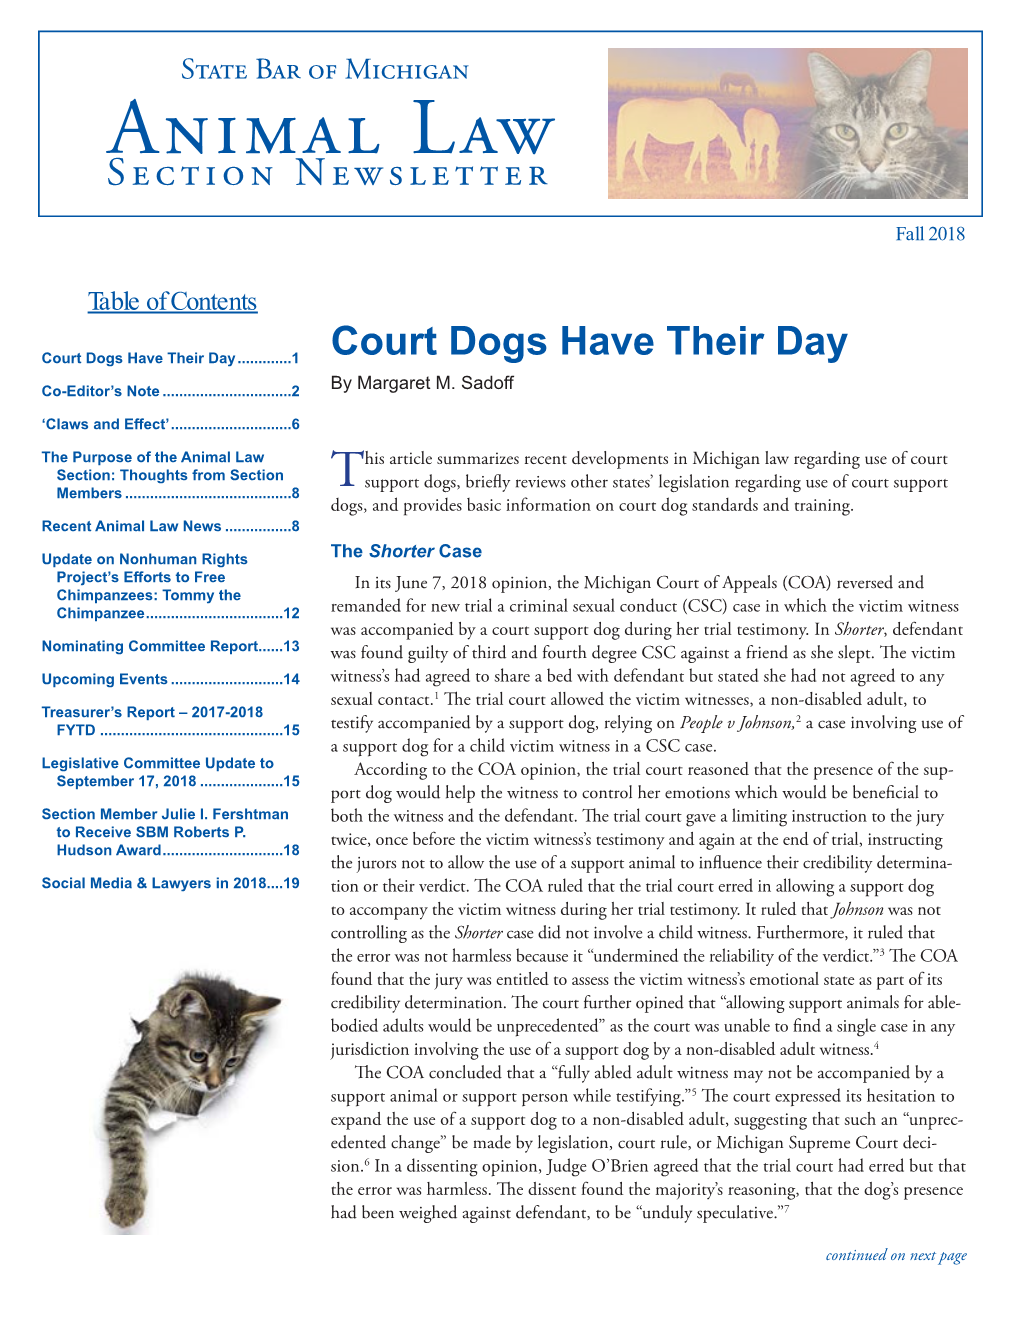 Animal Law Newsletter—Fall 2018